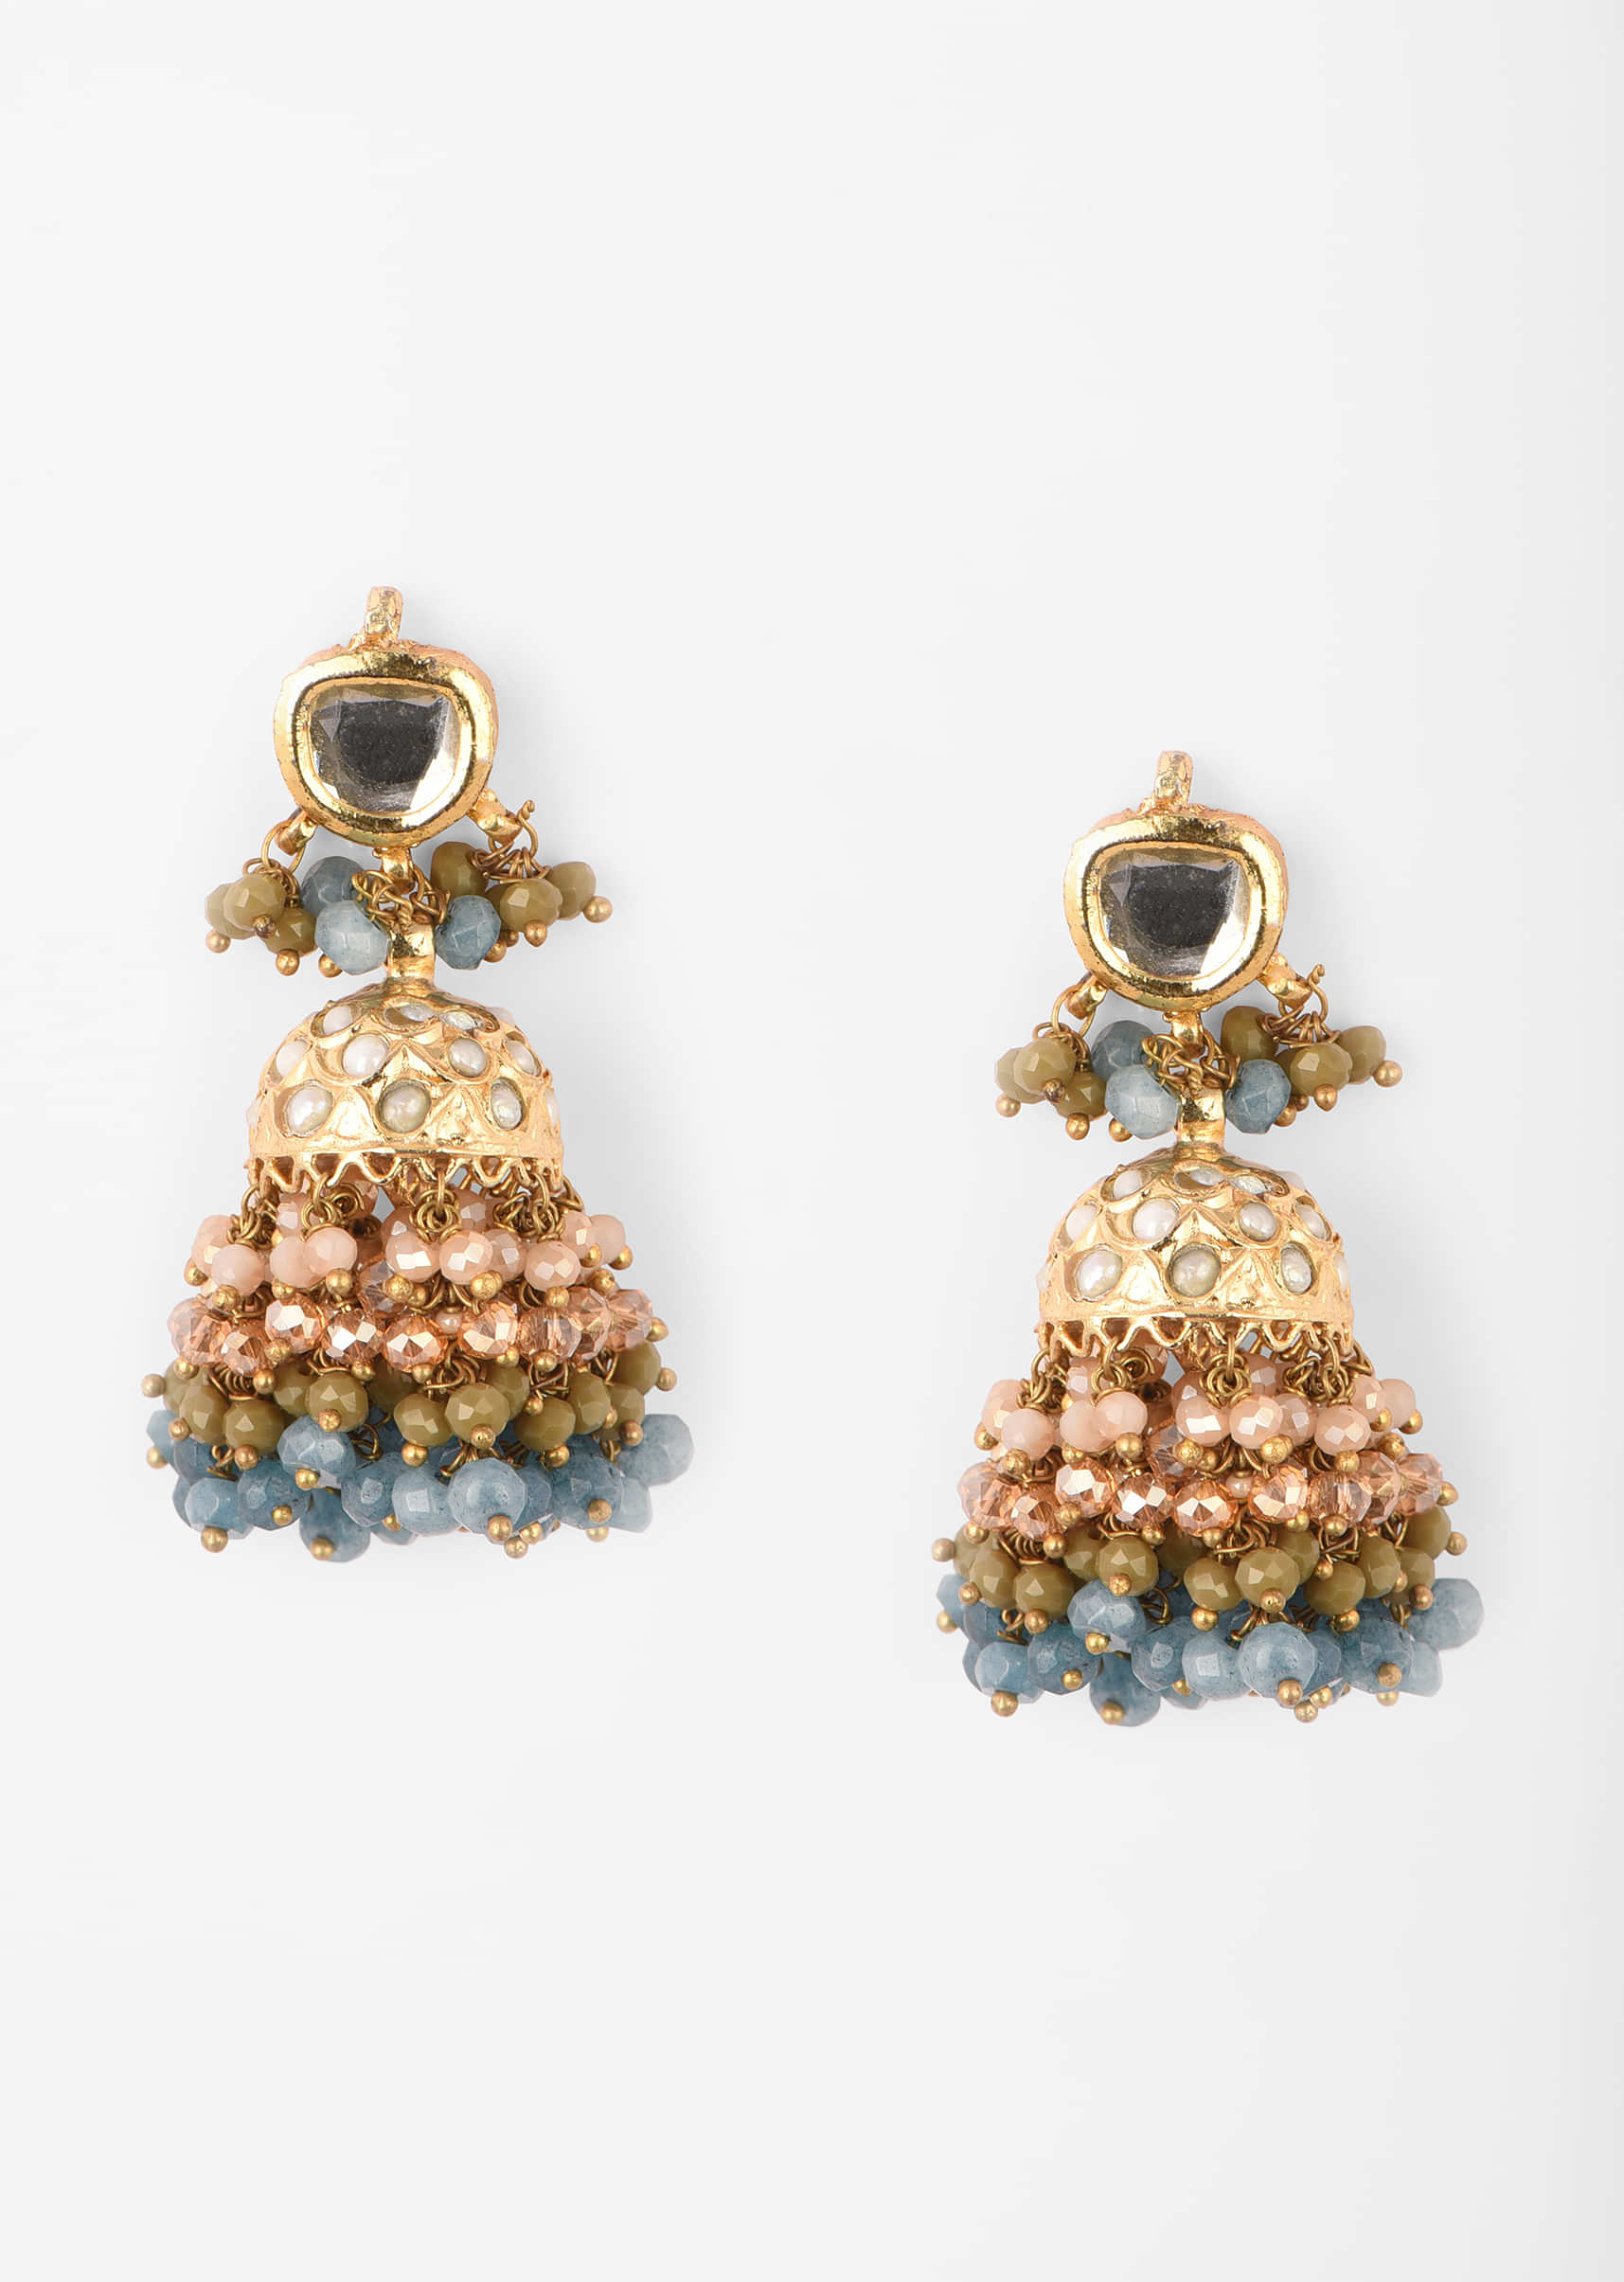 Buy Gold Plated Jhumkas With Kundan And Bead Fringes In The Shades Of ...